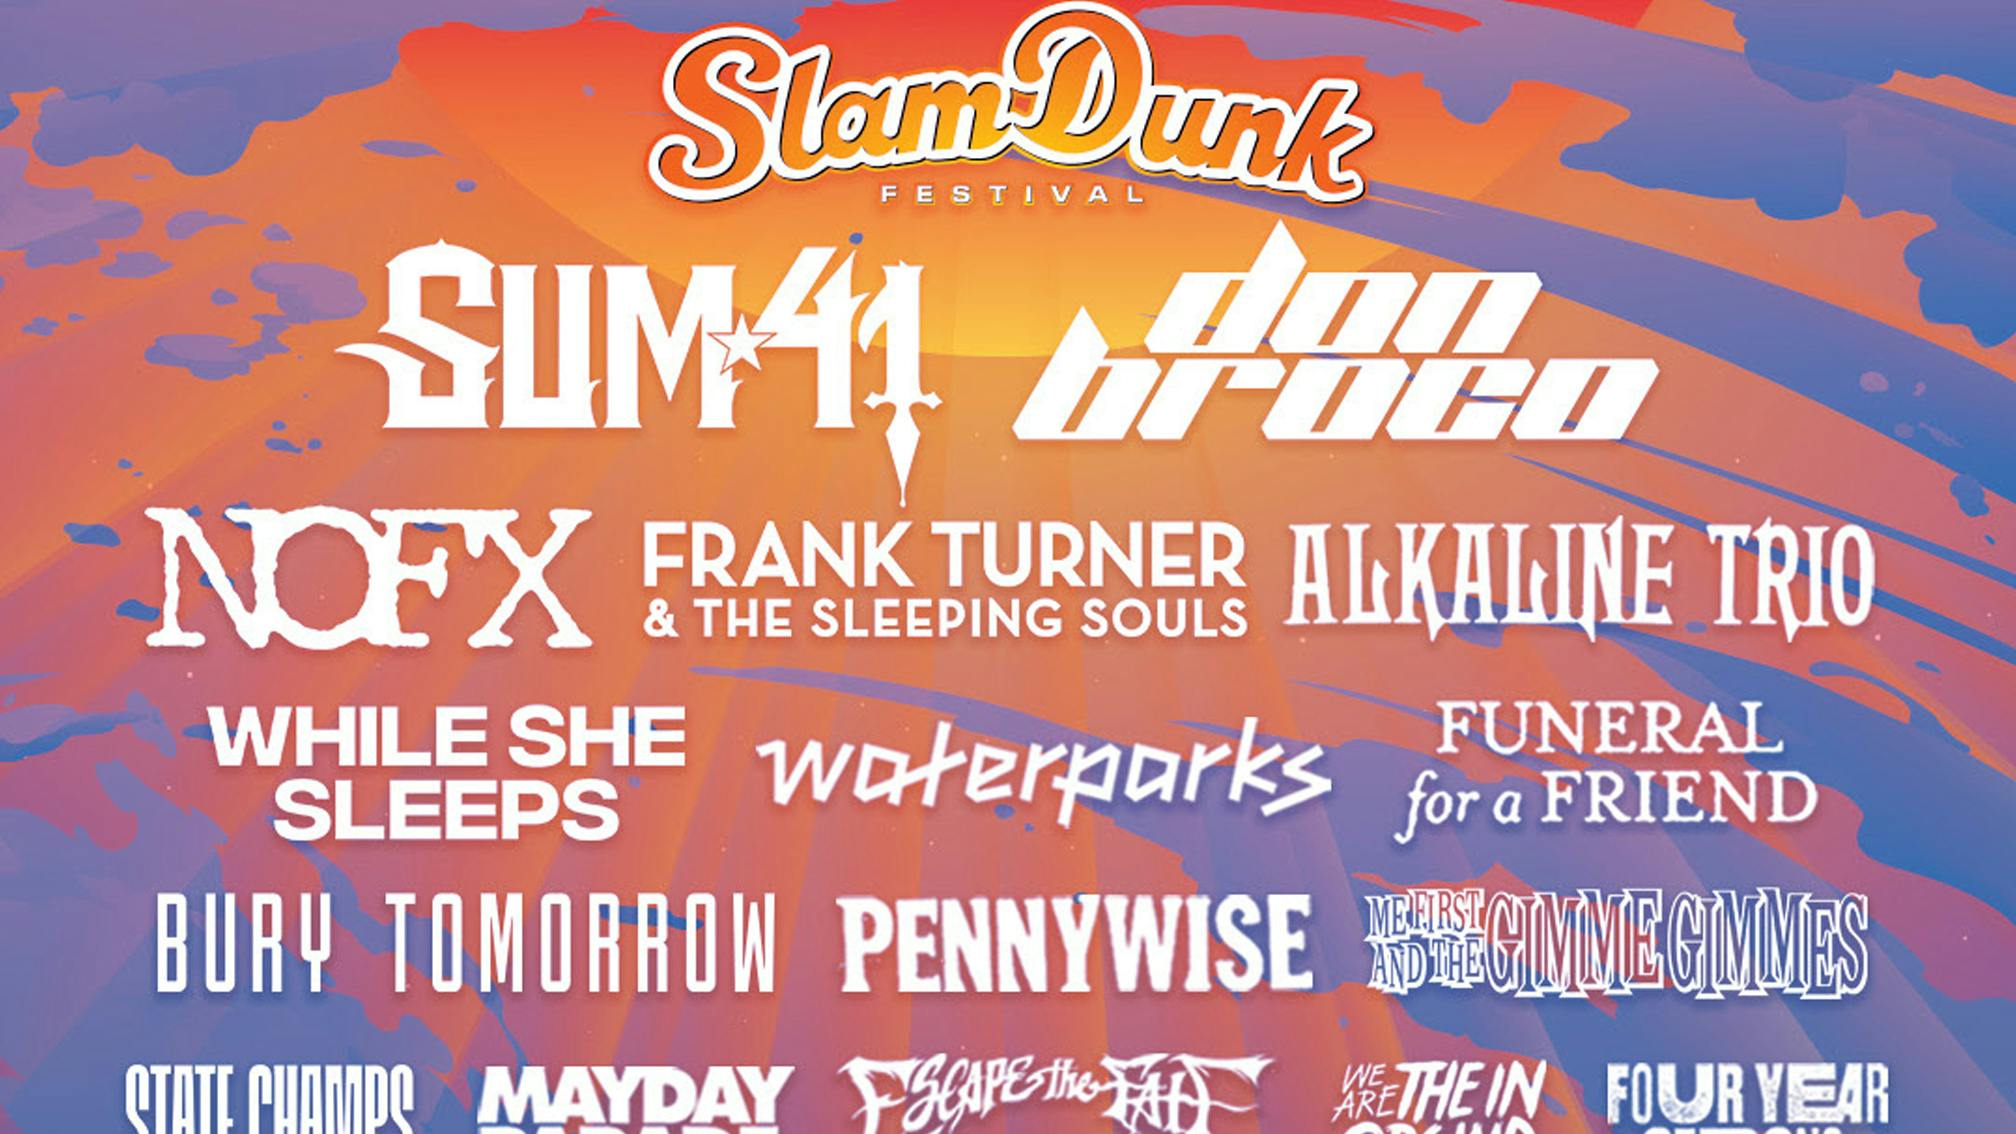 Slam Dunk announce Frank Turner, Alkaline Trio, Funeral For A Friend and more